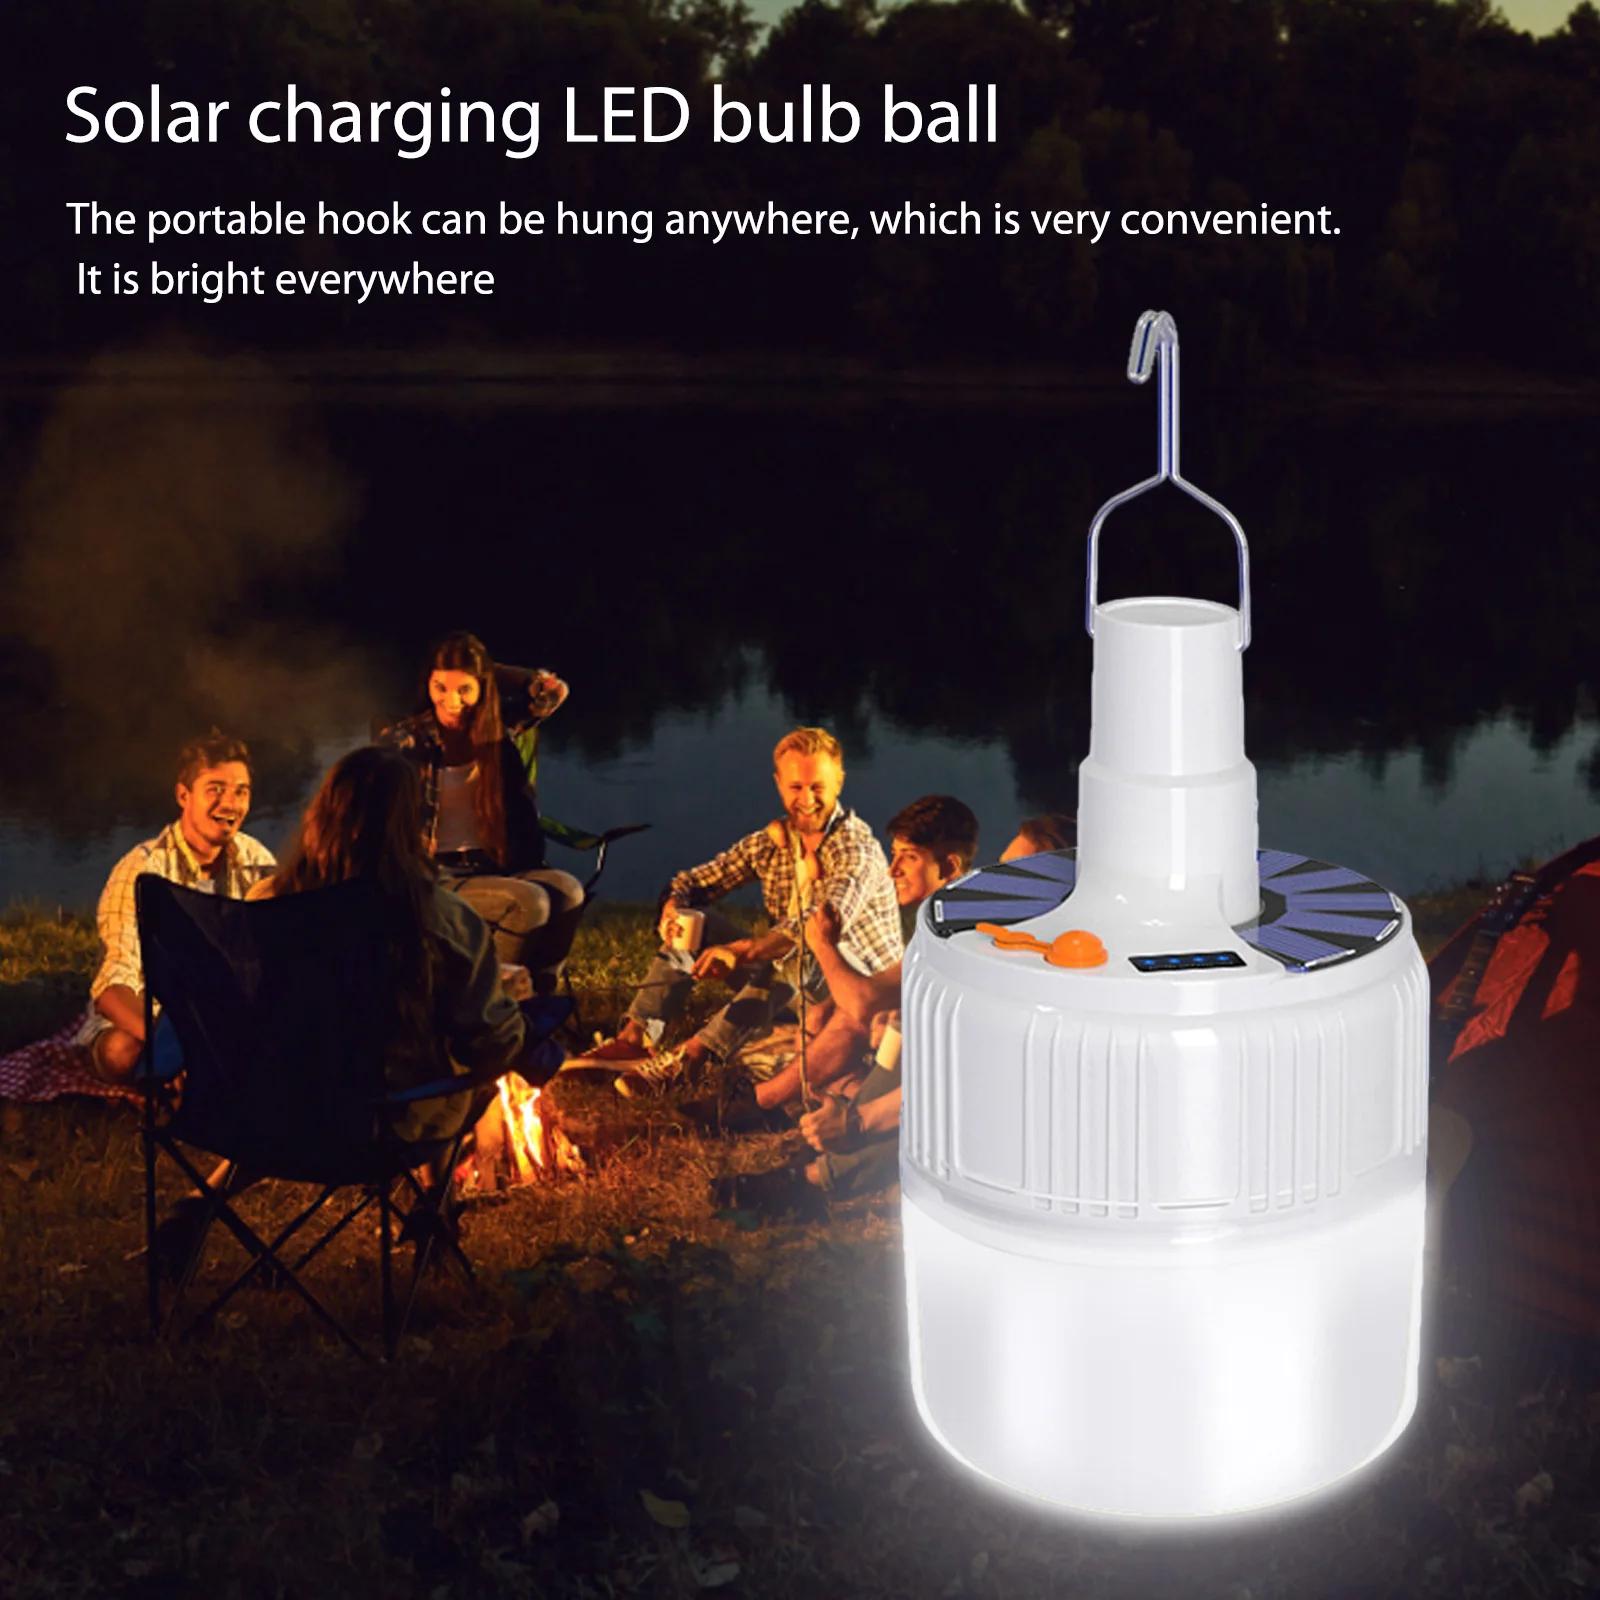 

Solar+USB Emergency Bulb Waterproof 21W Night Market Stall Lamp Power Display Outdoor Flashlight with Hook for Camp Picnic